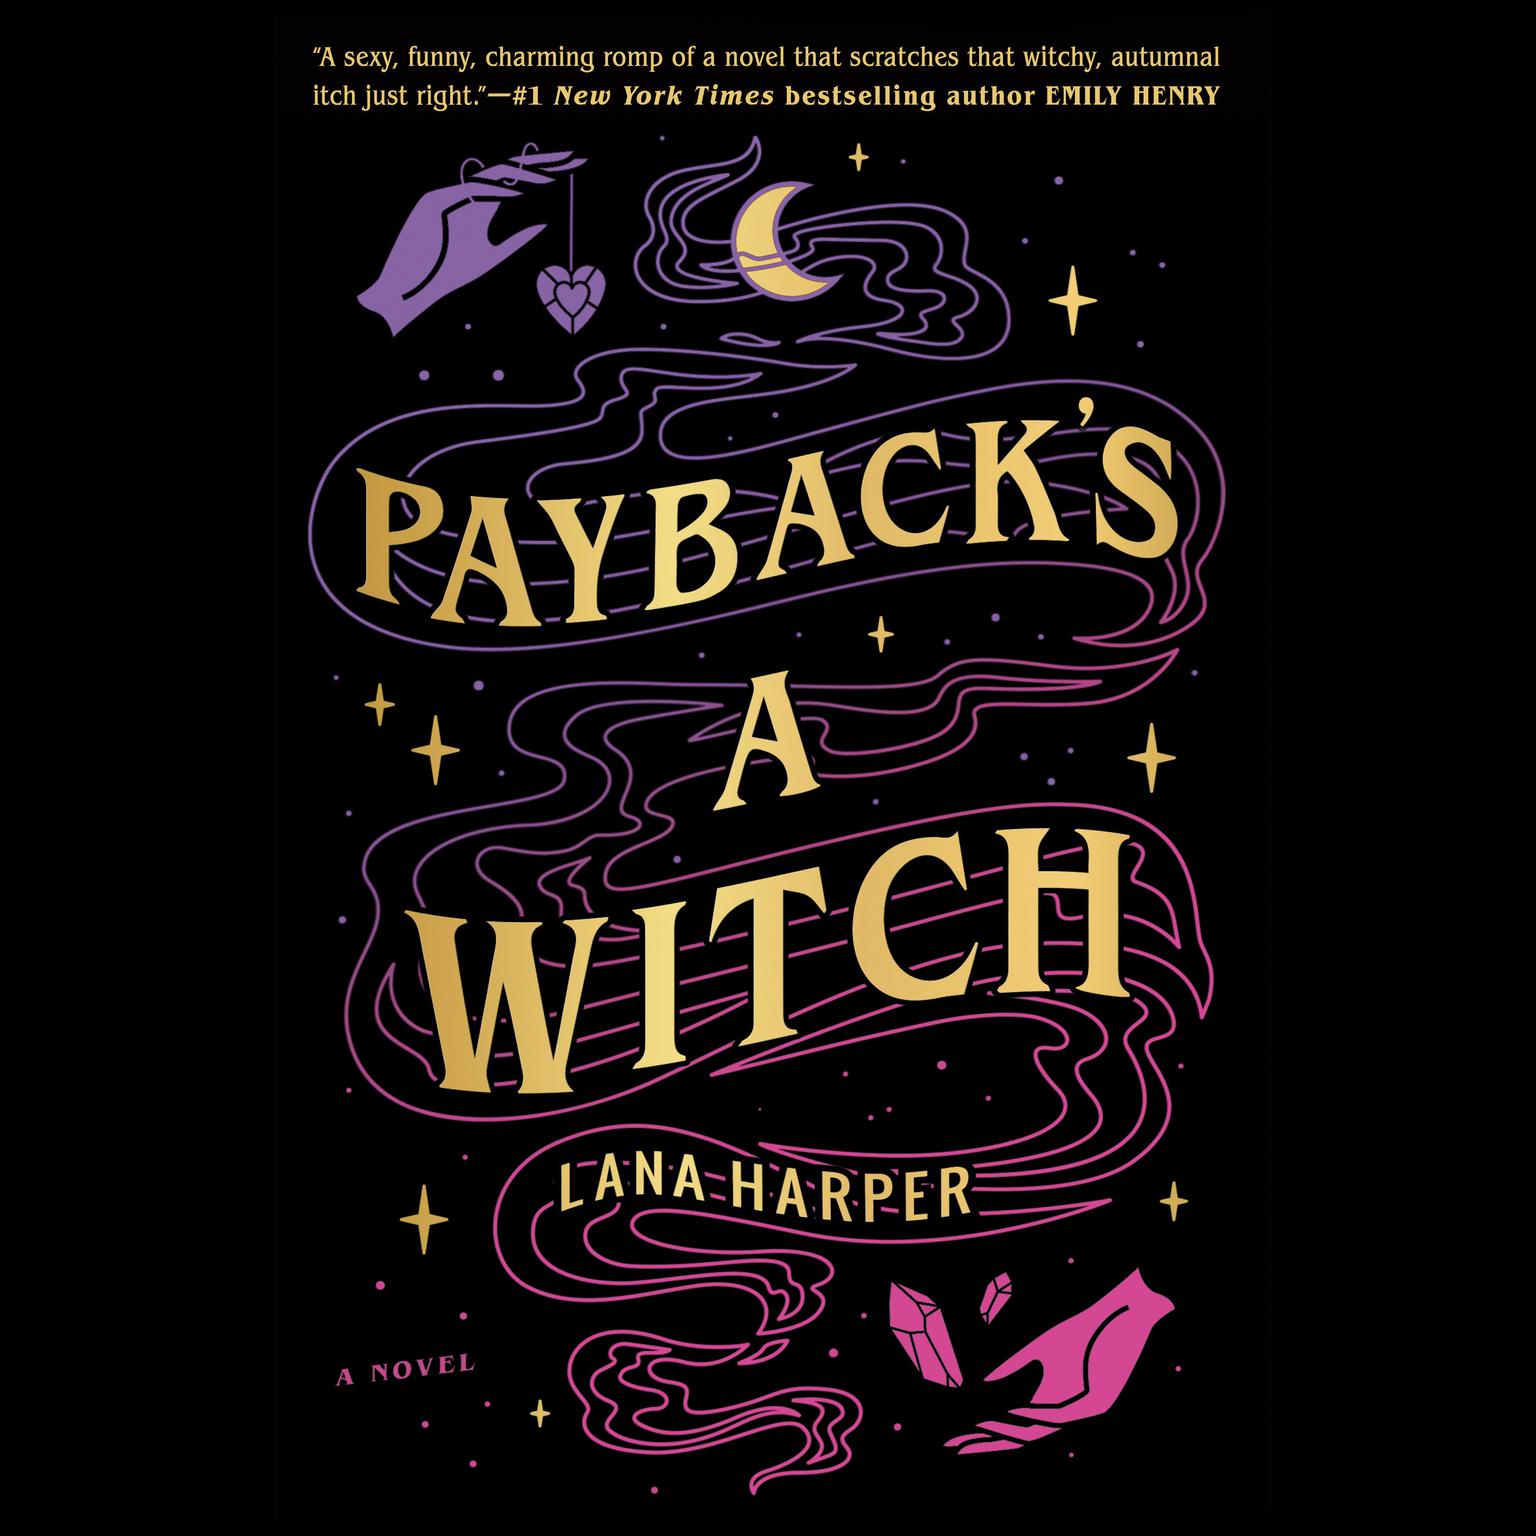 Payback's a Witch (2021, Penguin Publishing Group)